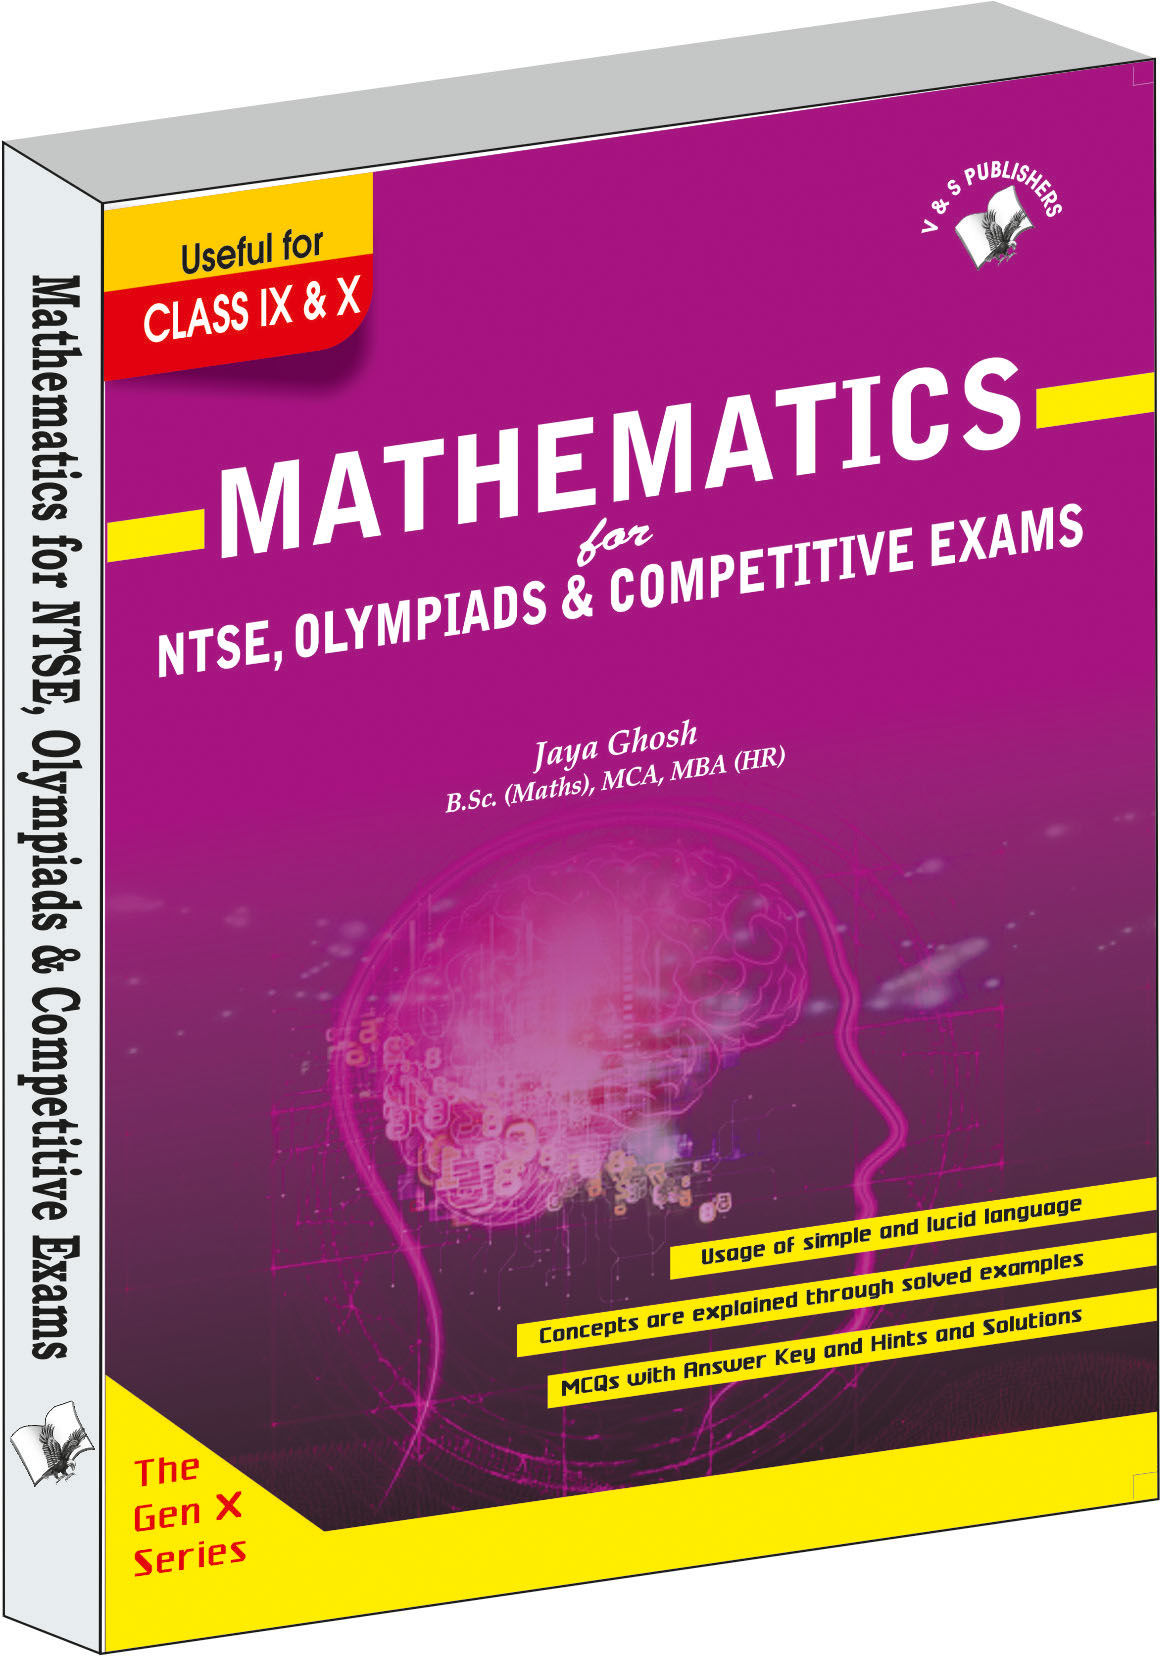 Mathematics -For NTSE,olympiads & competitive exams